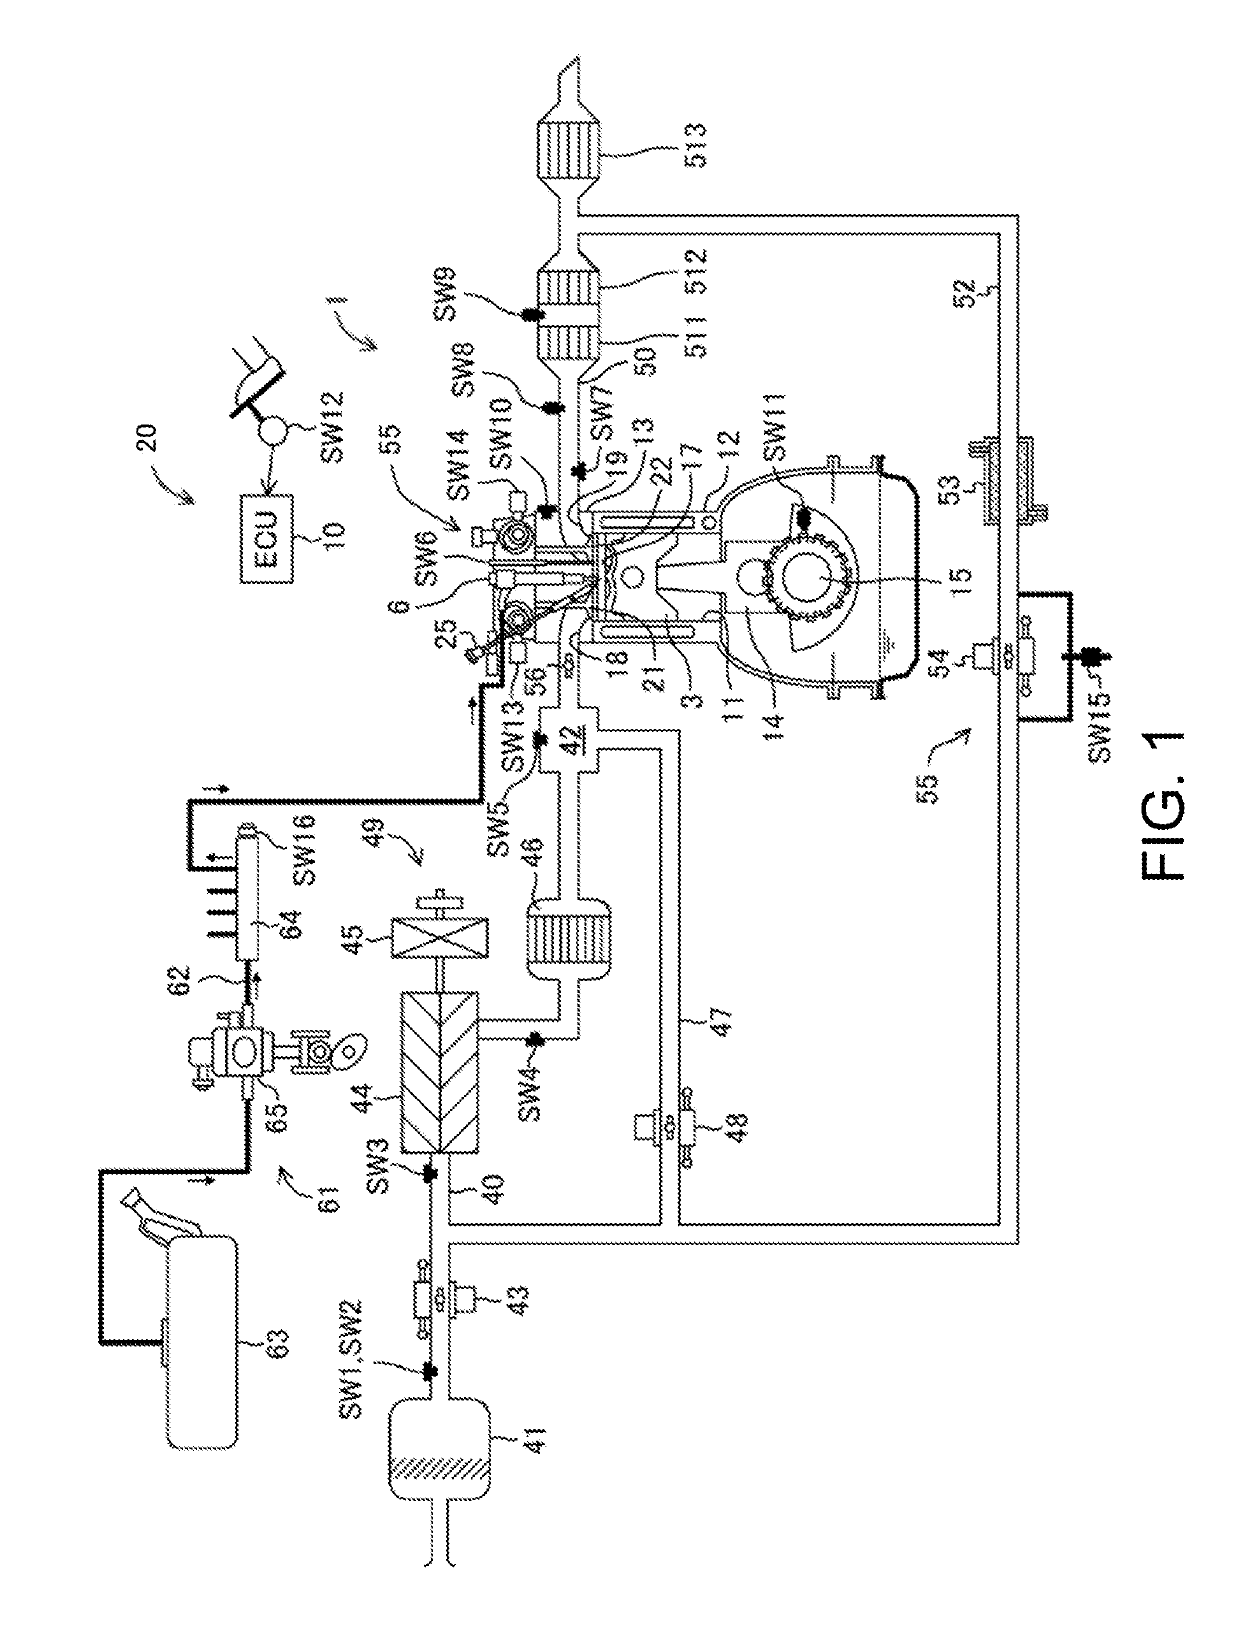 Control system of compression-ignition engine